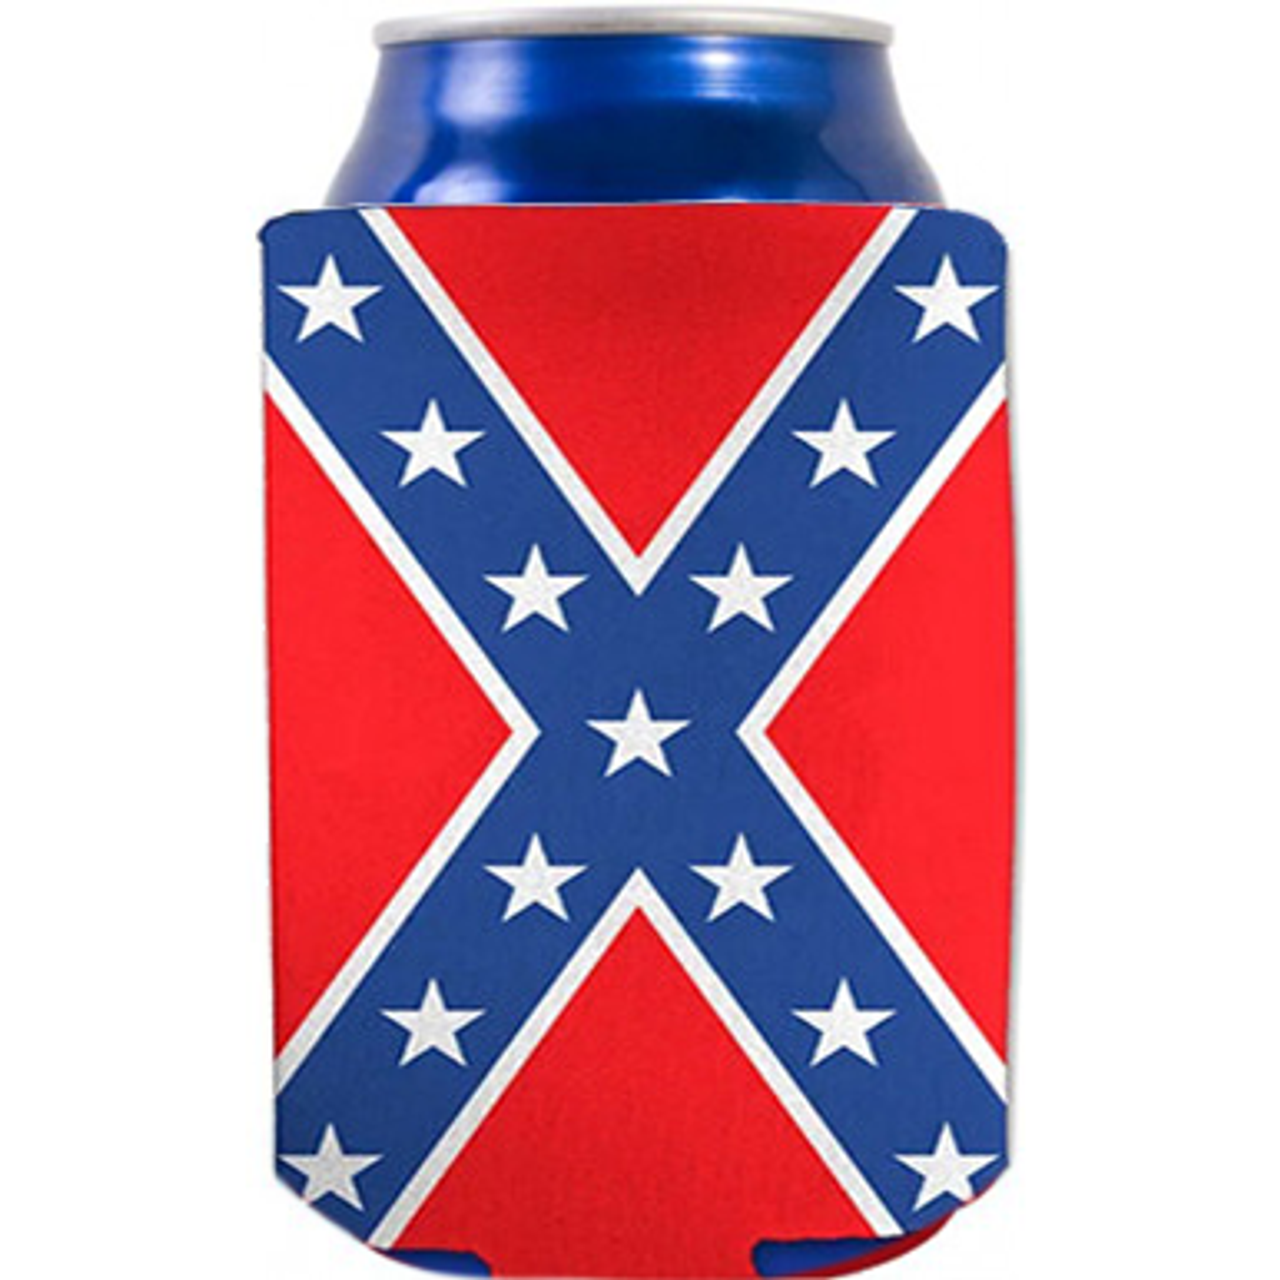 https://cdn11.bigcommerce.com/s-n2jcqcuzo0/images/stencil/1280x1280/products/1321/3678/Confederate_24_Oz_Can_Insulator__36572.1667599732.png?c=1